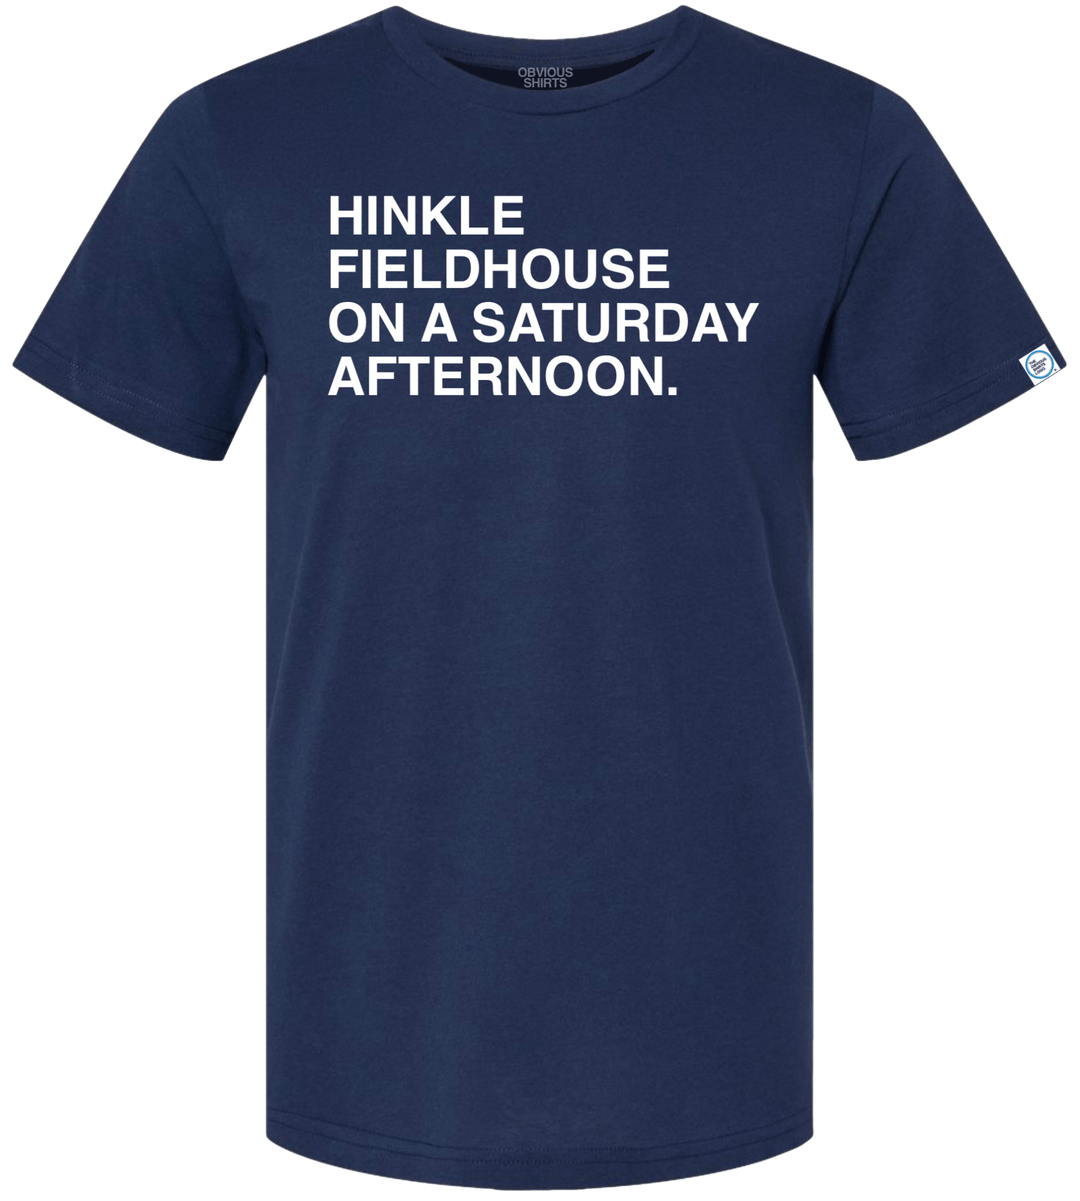 HINKLE FIELDHOUSE ON A SATURDAY AFTERNOON. - OBVIOUS SHIRTS